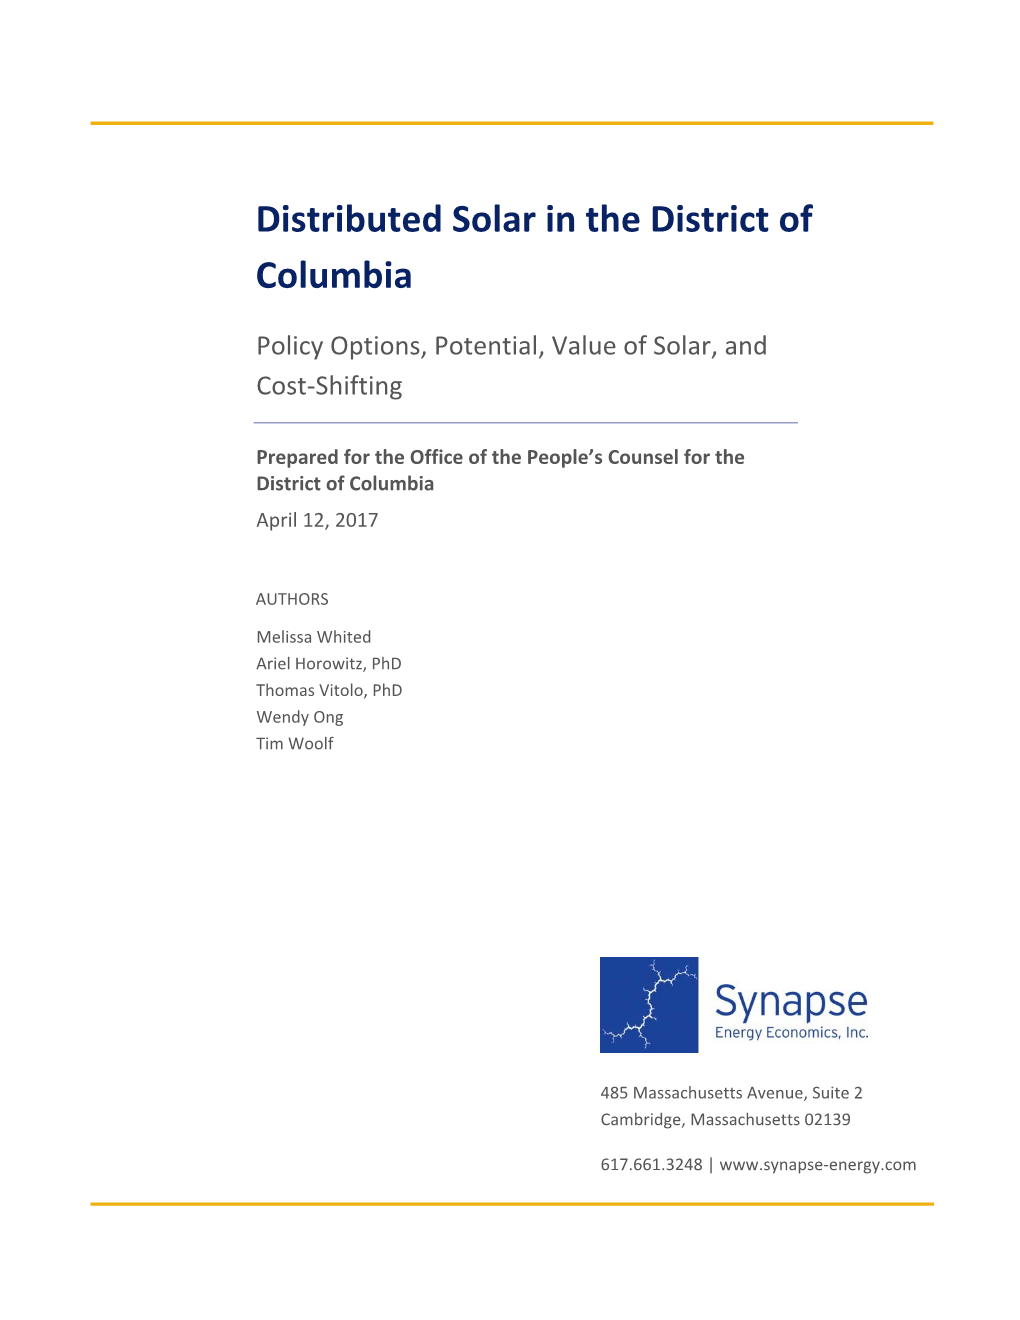 Distributed Solar in the District of Columbia